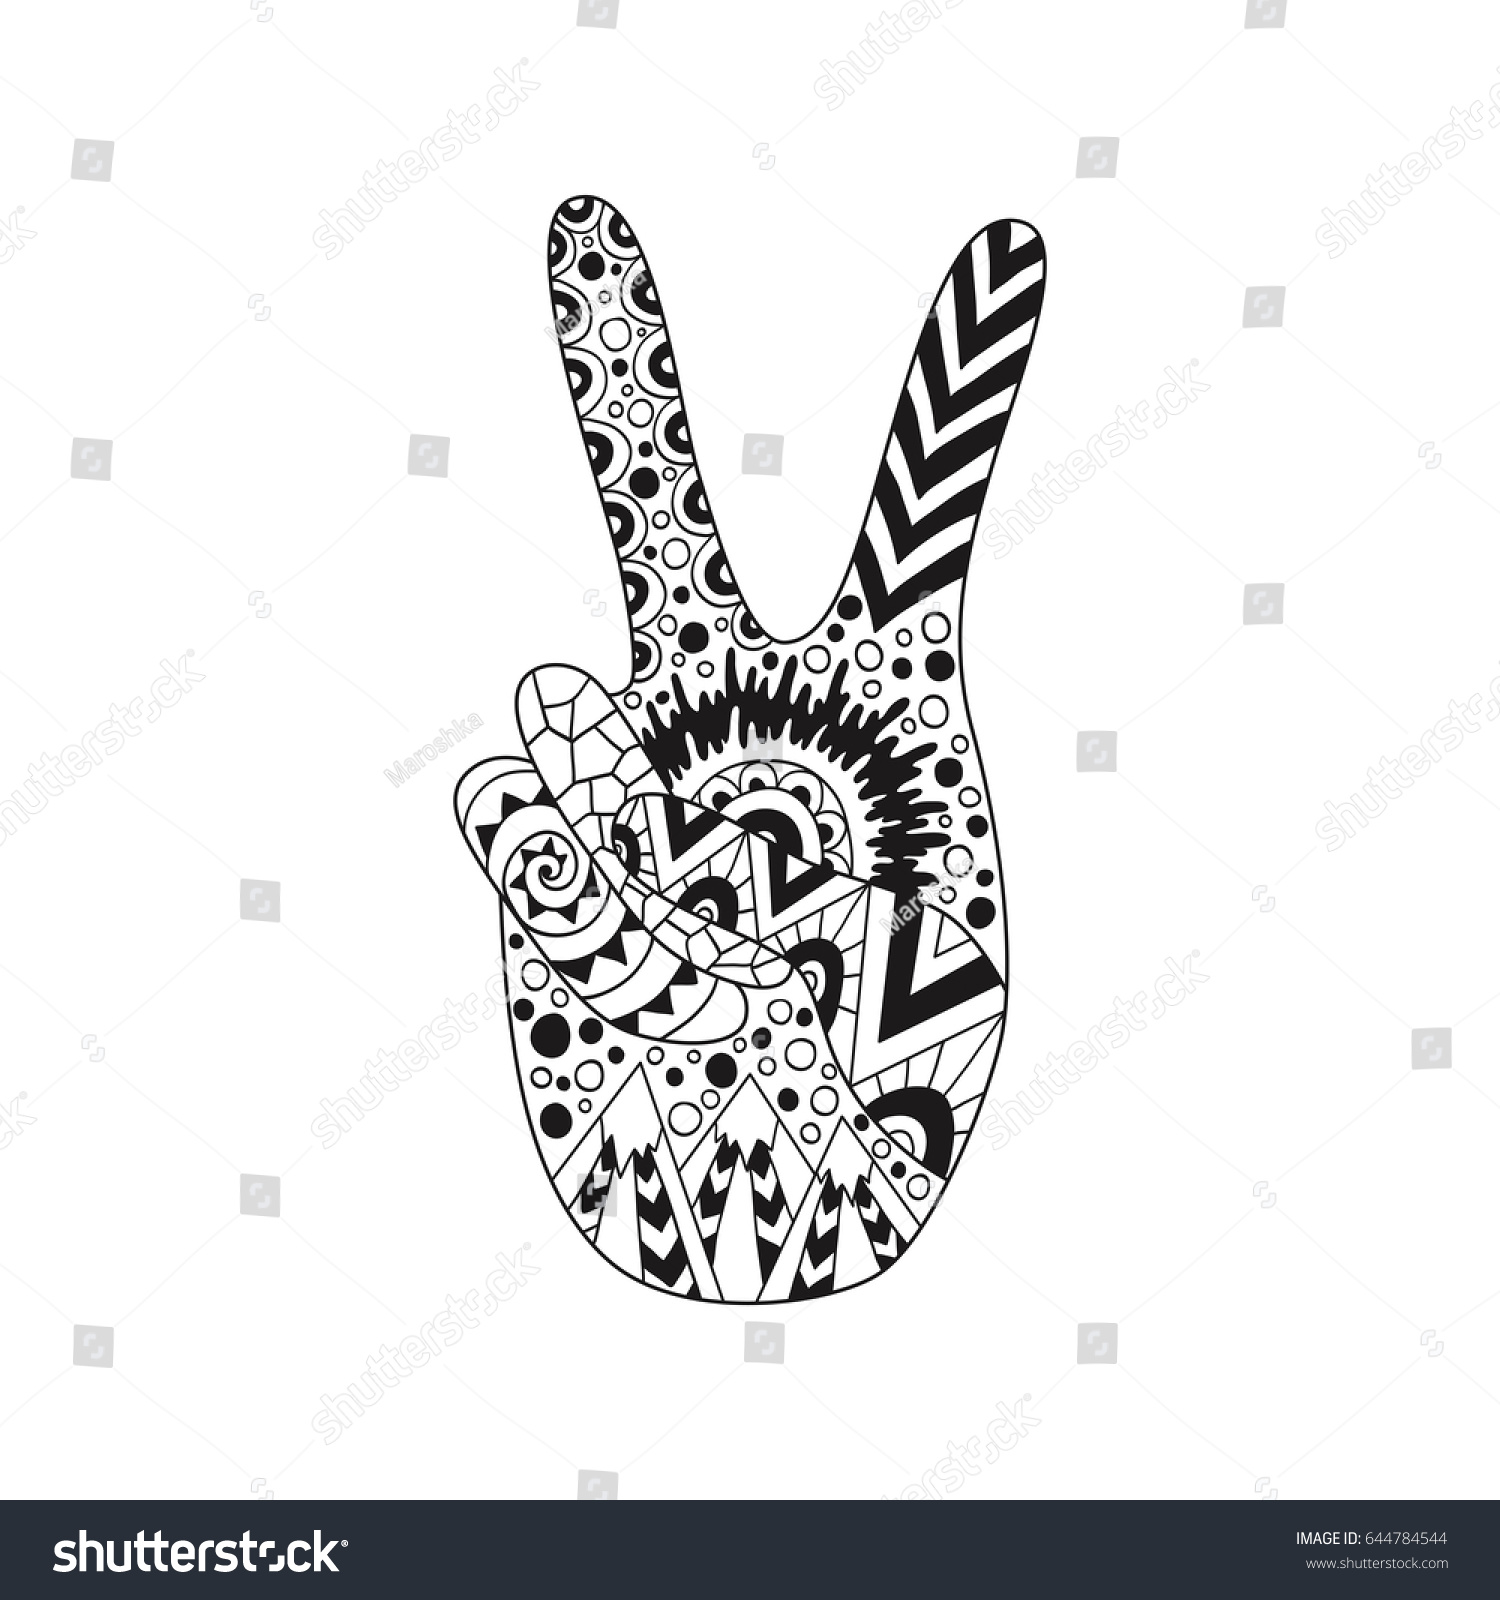 Hand drawn hippie peace symbol for anti stress colouring page Pattern for coloring book